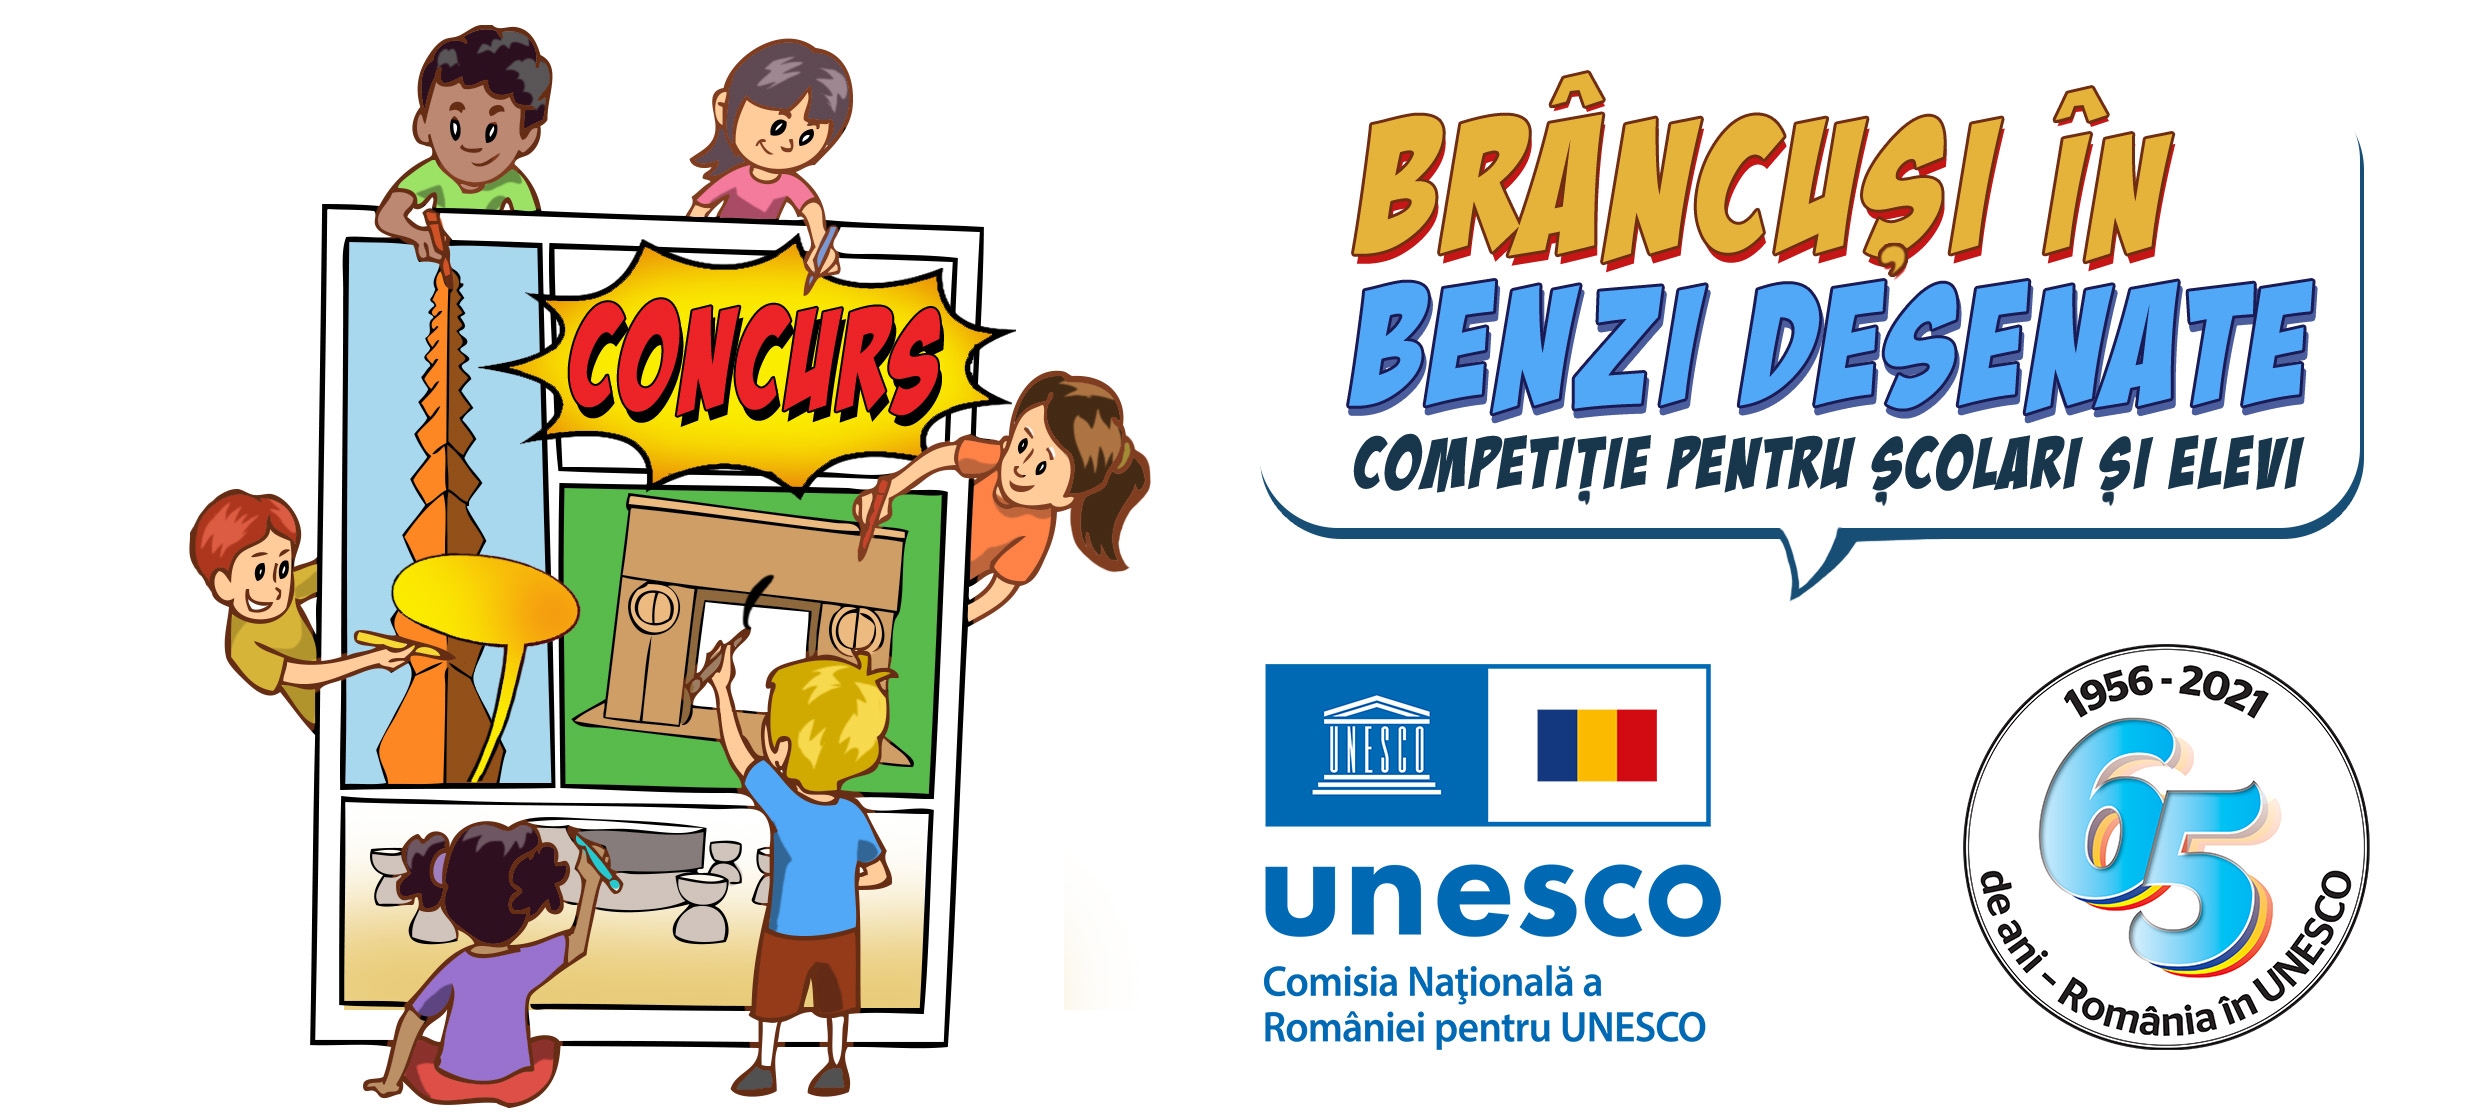 Winners of the Comics Contest dedicated to the great sculptor Constantin Brâncuși